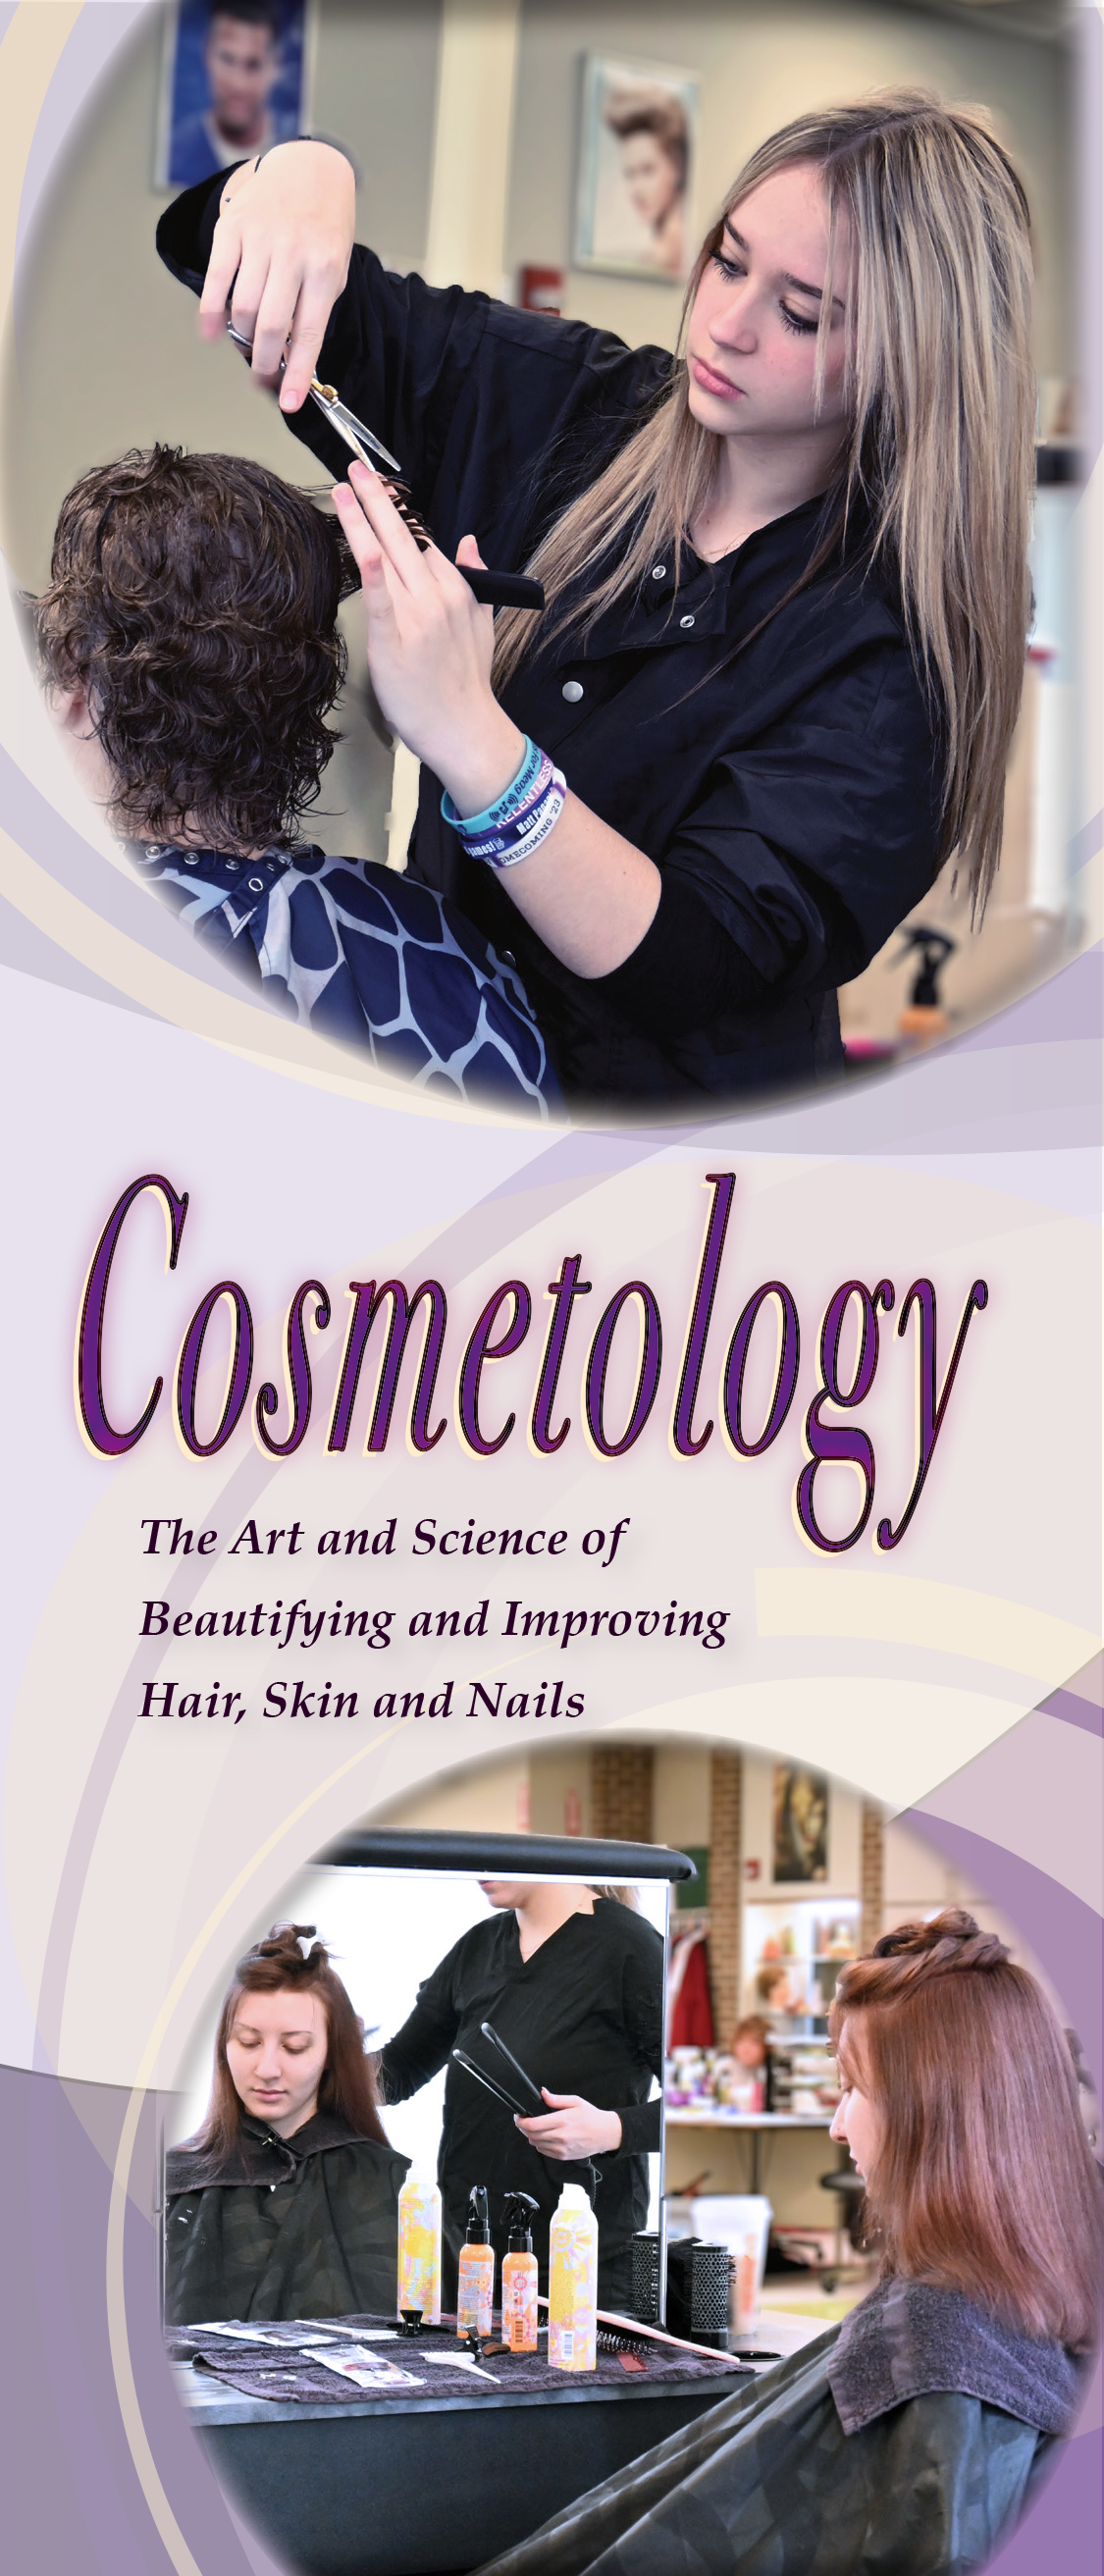 Cosmetology brochure cover